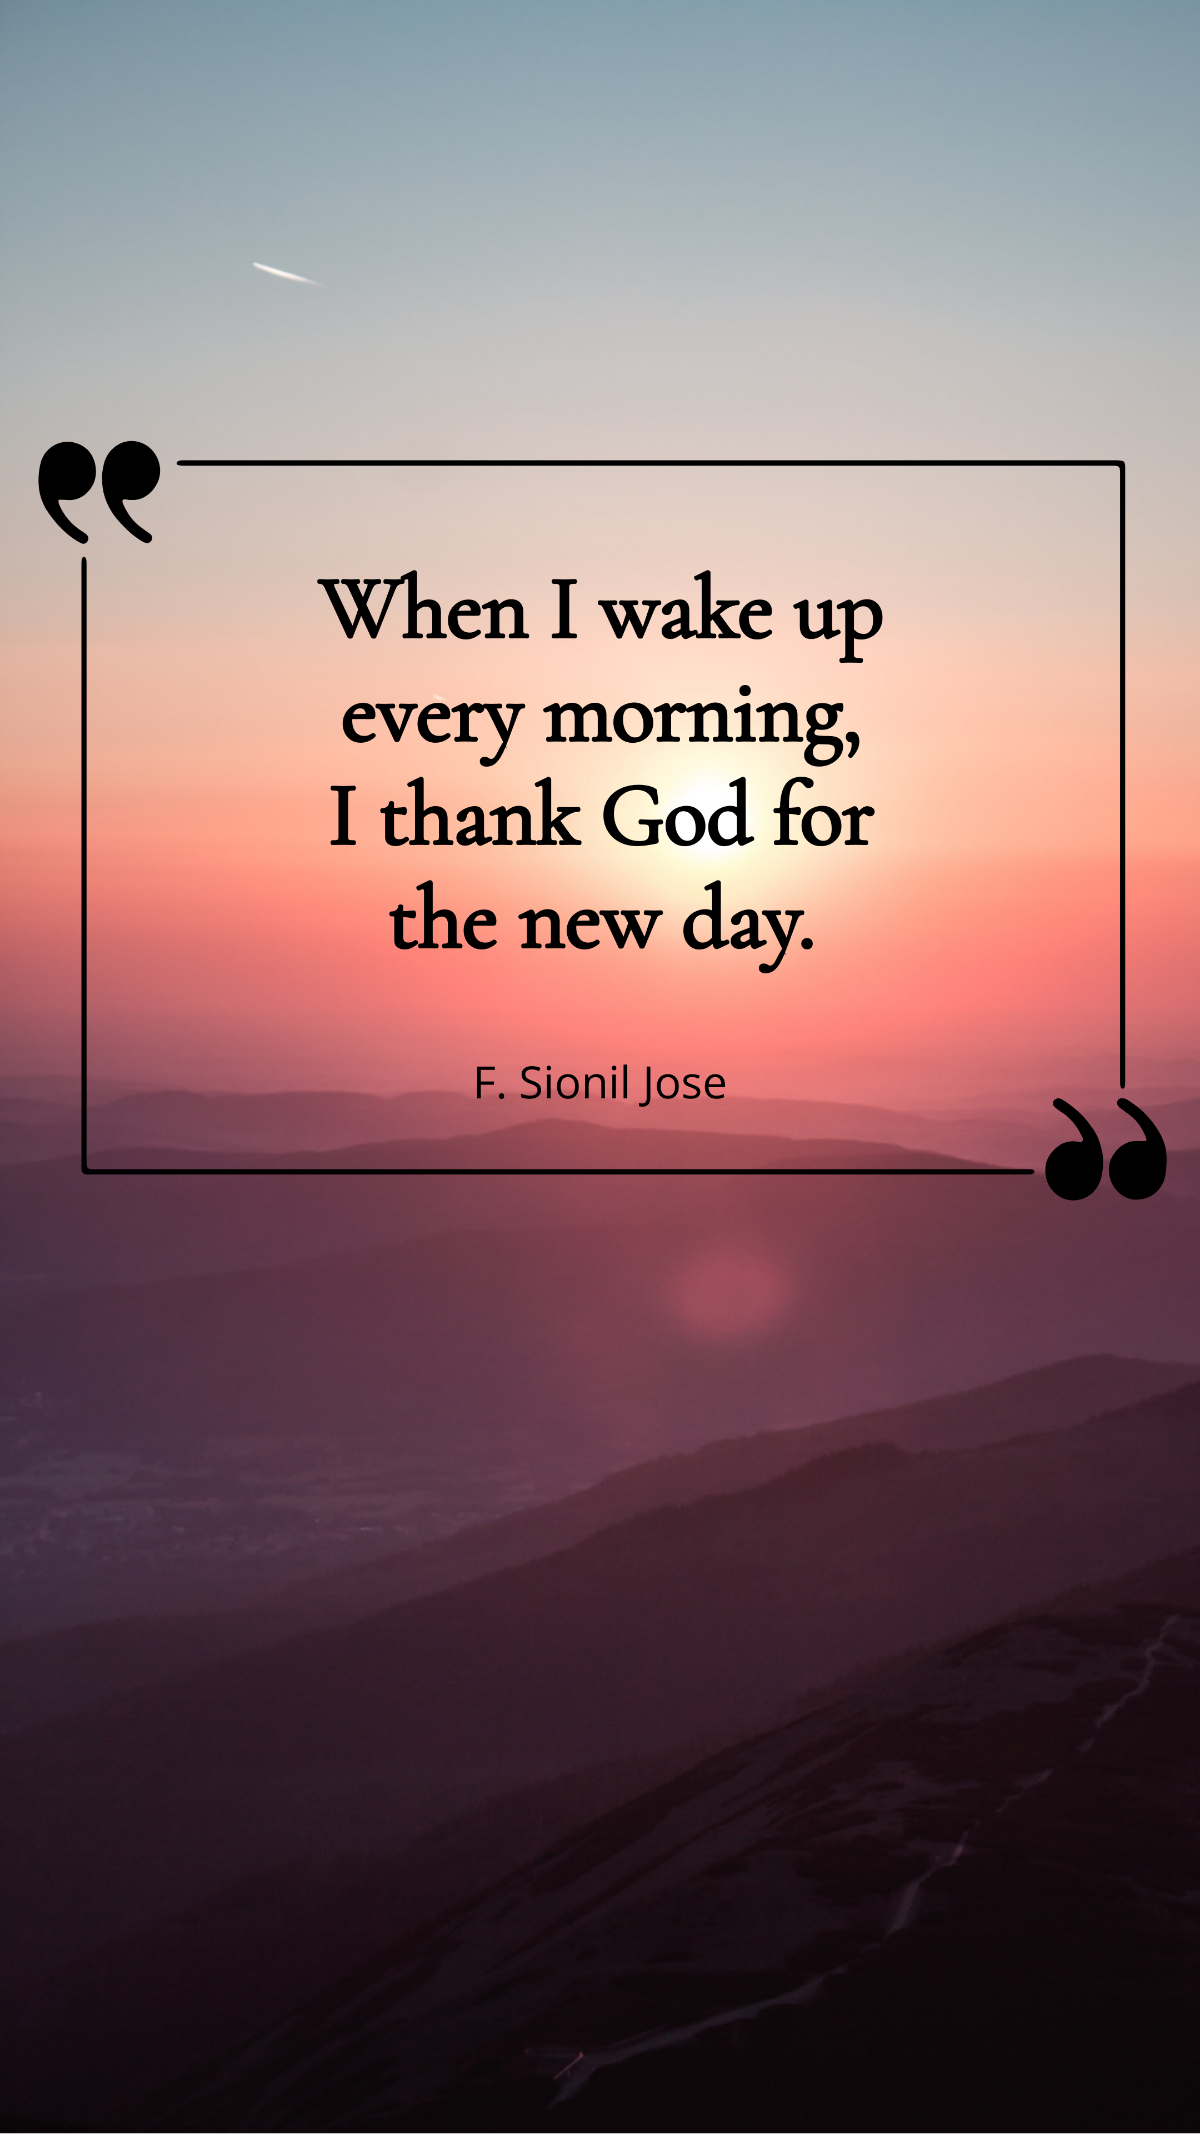 F. Sionil Jose - When I wake up every morning, I thank God for the new day. Template